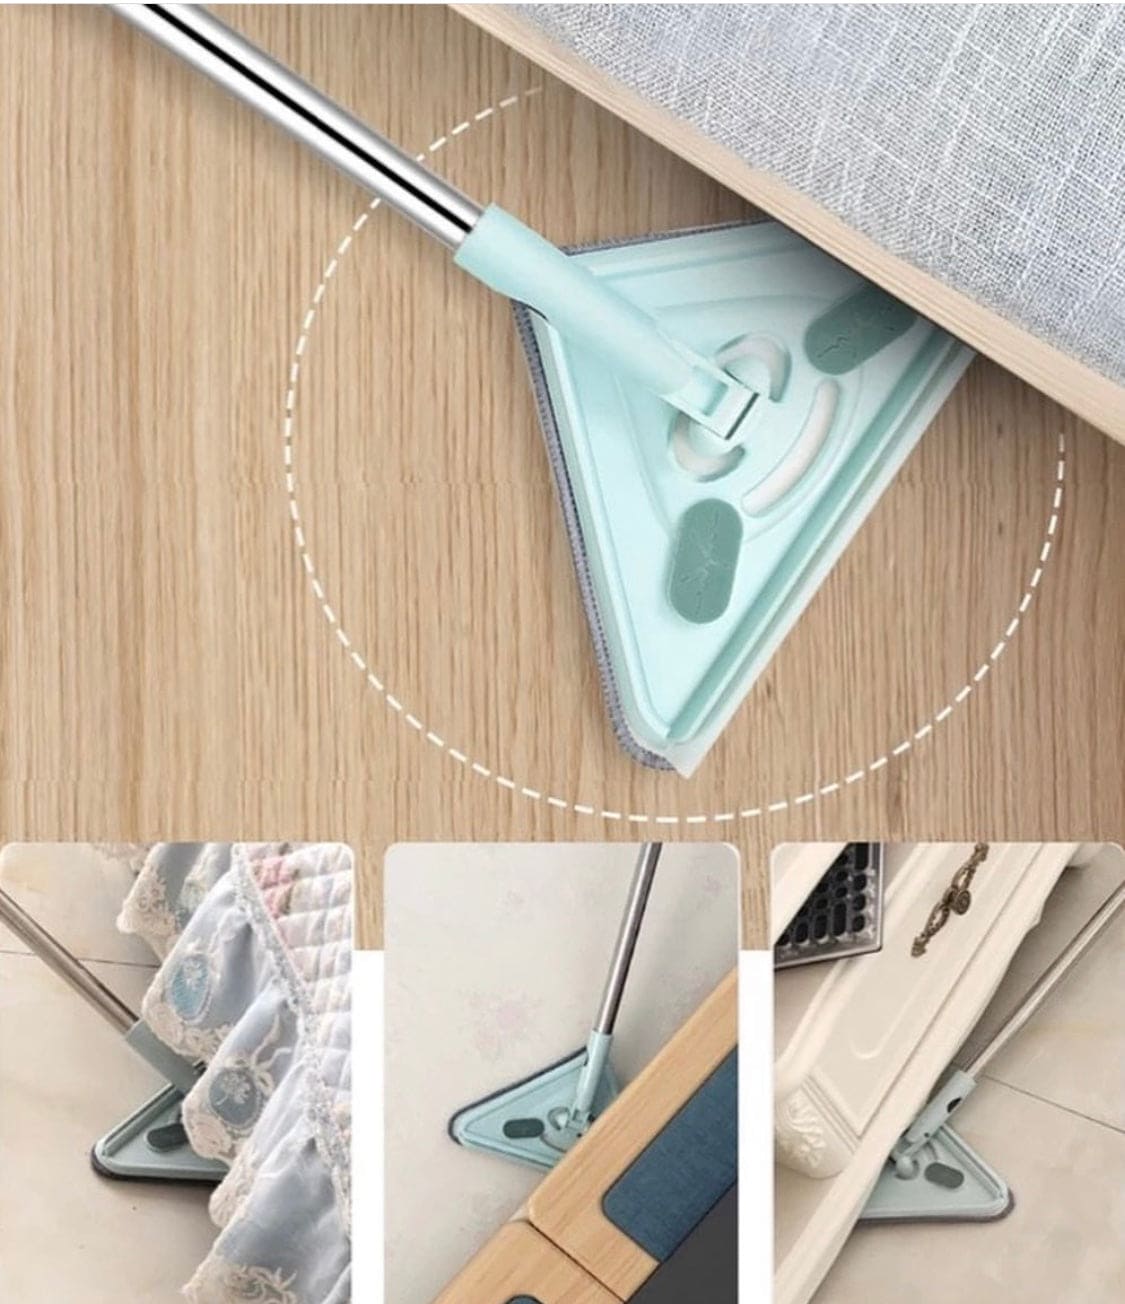 Mini Triangle Mop, 360˚ Degree Rotatable Triangular Cleaning Mop, Adjustable Spin Scrubber Tool